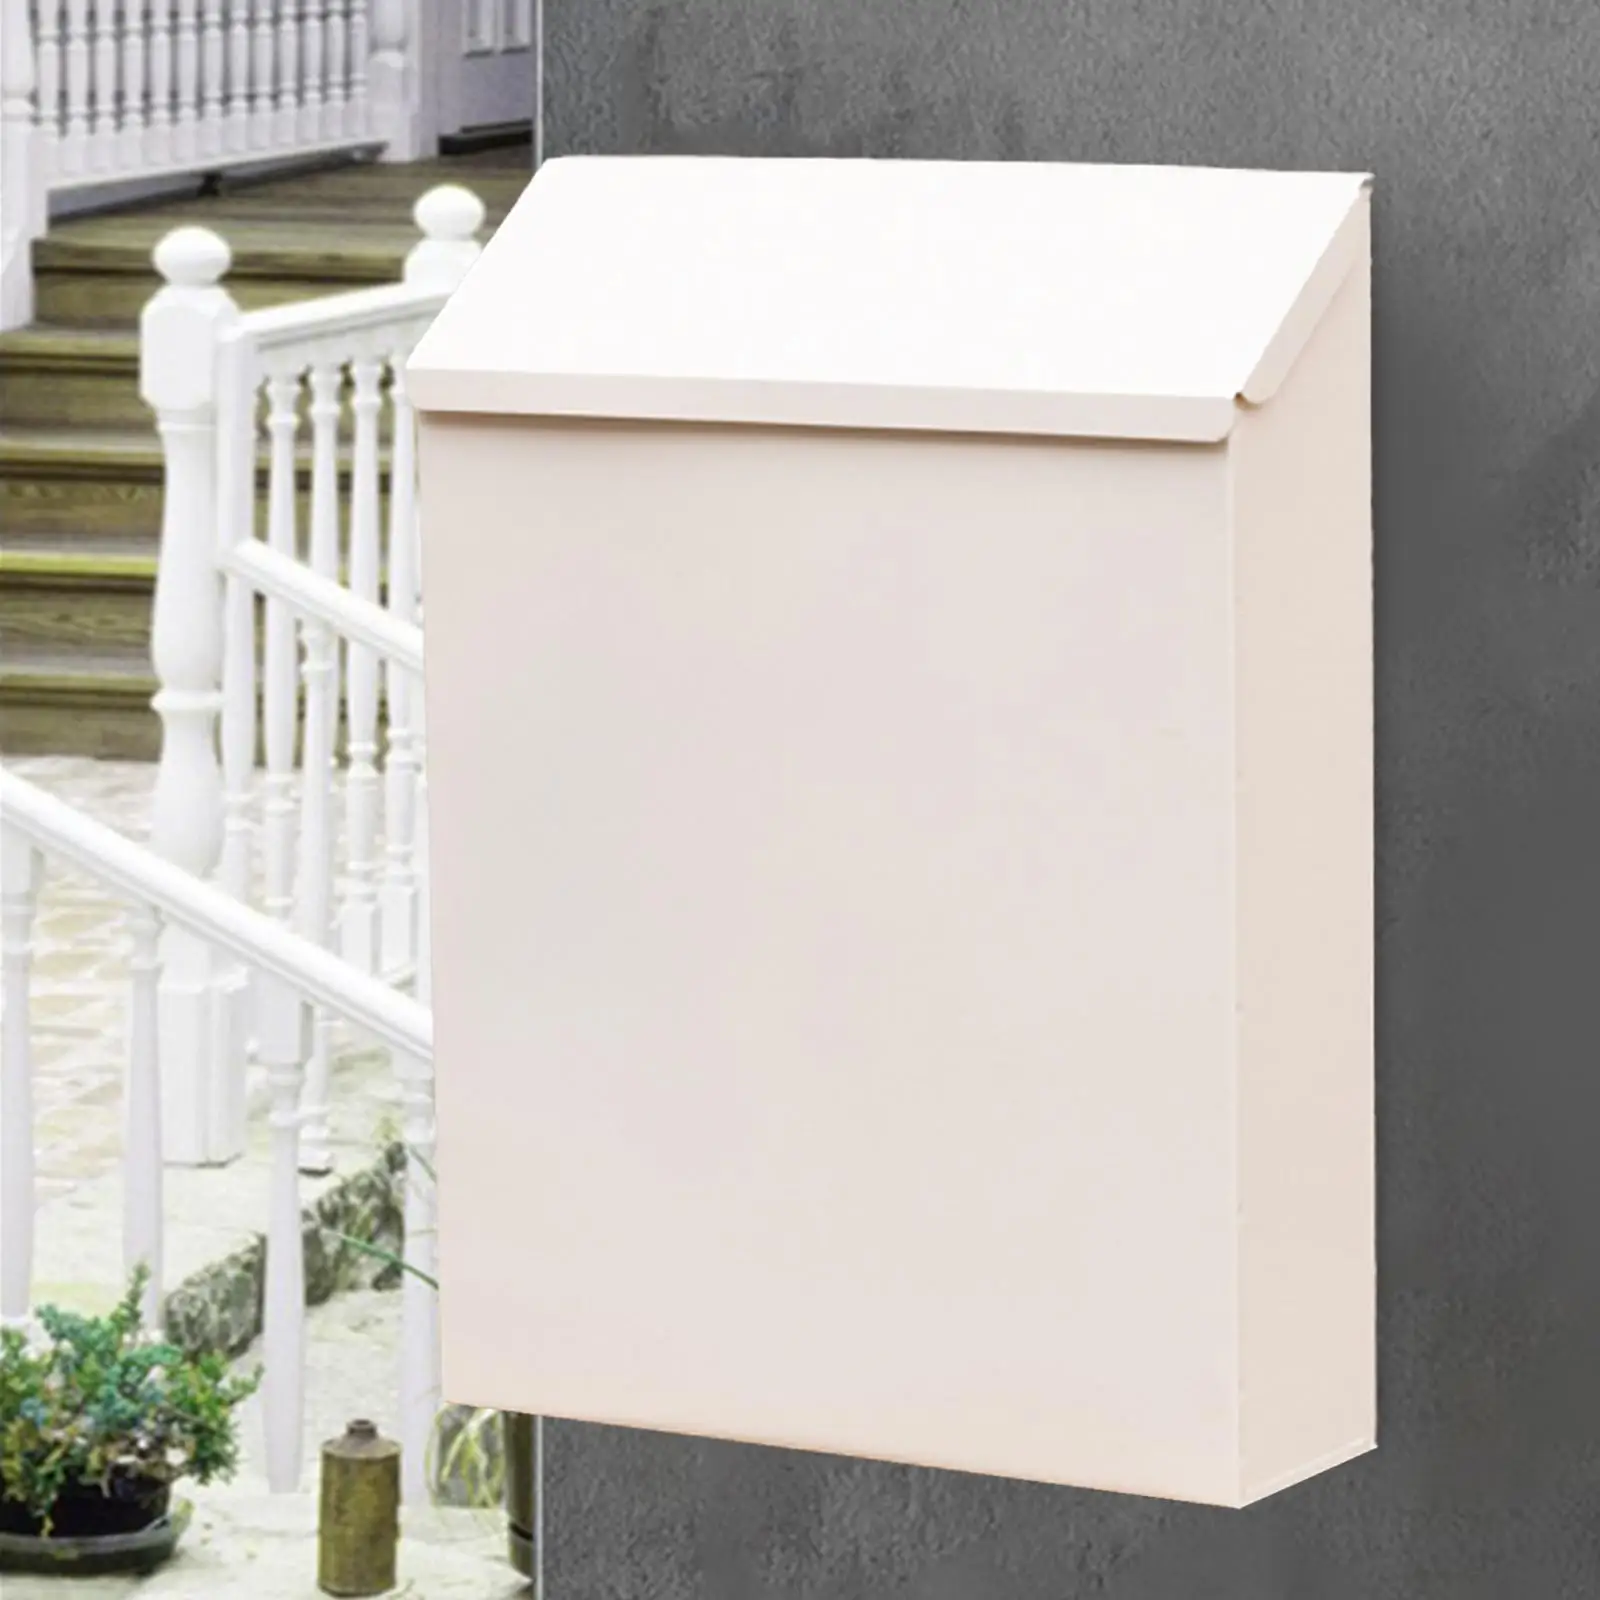 Drop Box with Lock Large Capacity Rainproof Letterbox Wall Mounted Mailbox Wall Hanging Mail Box for Outdoor Home Office Decor